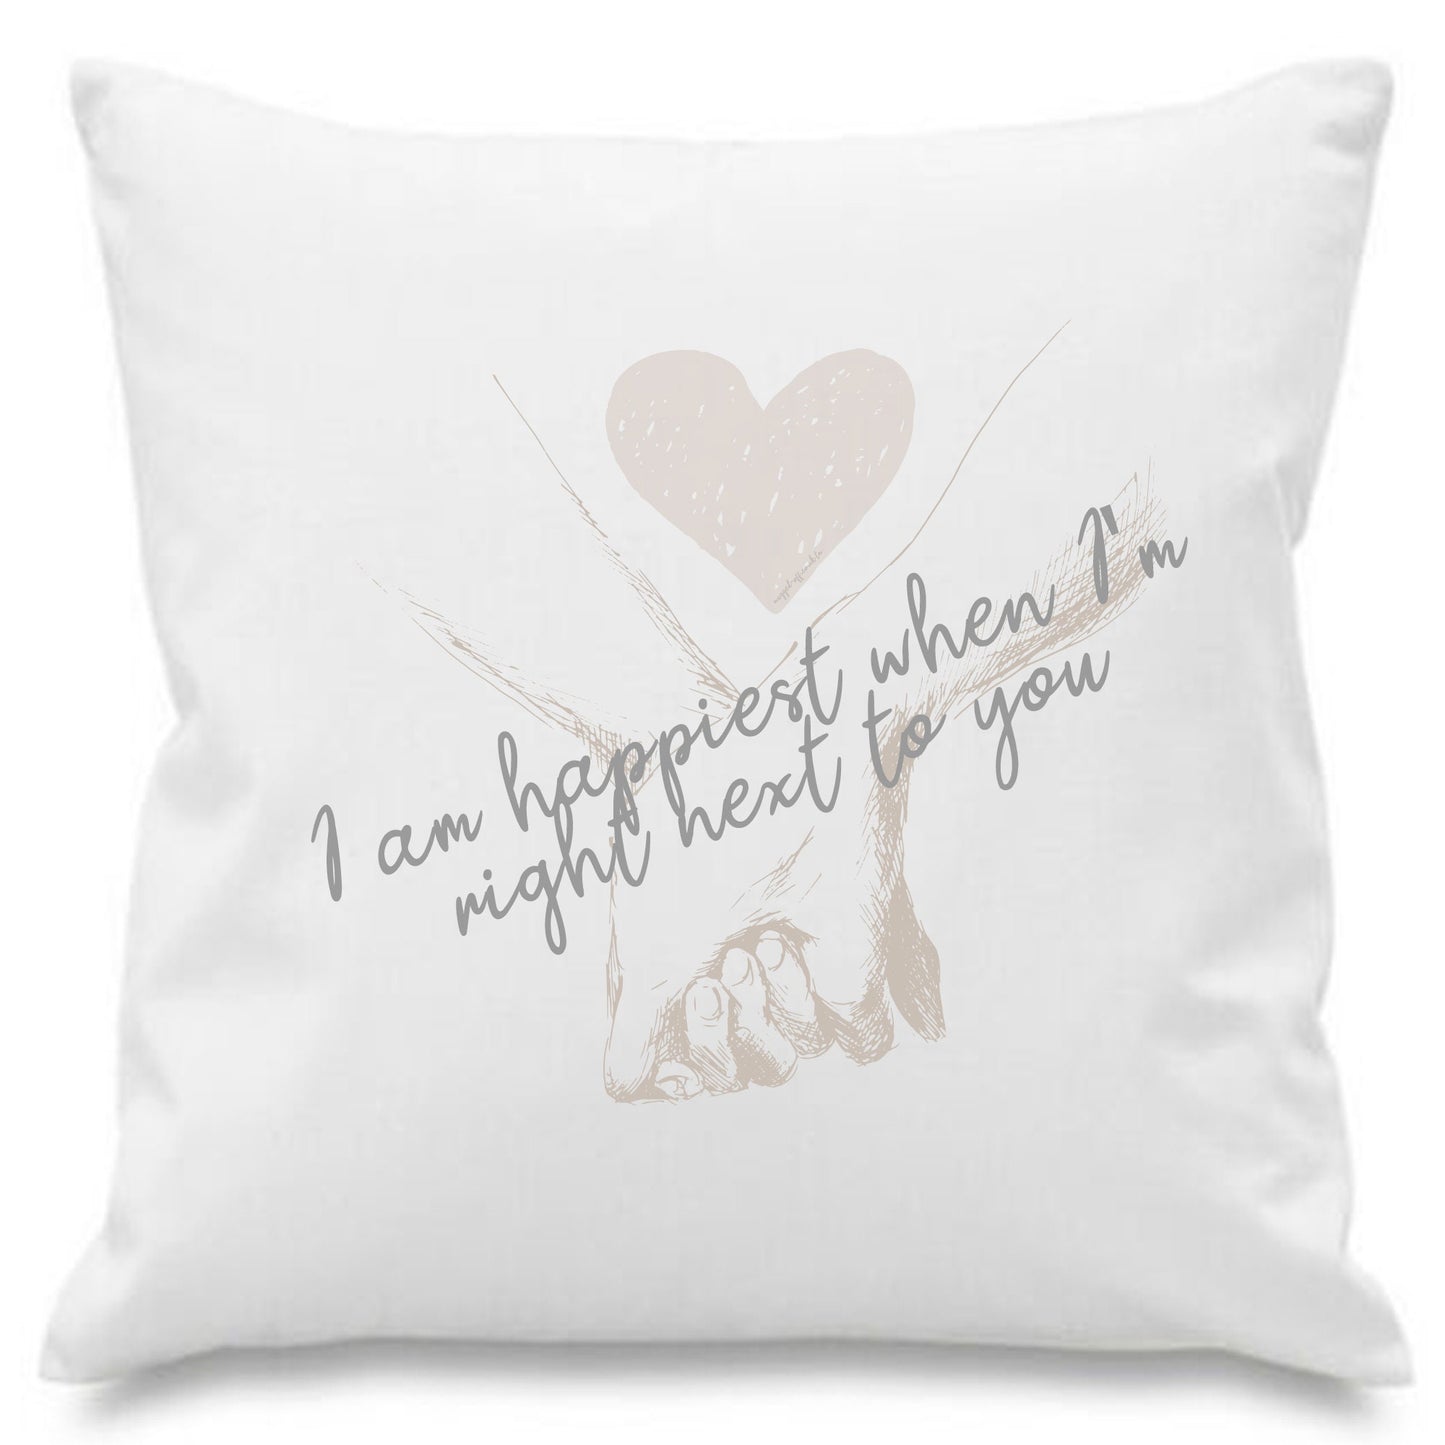 New home new home gifts perfect Housewarming Gifts Cushion Cover